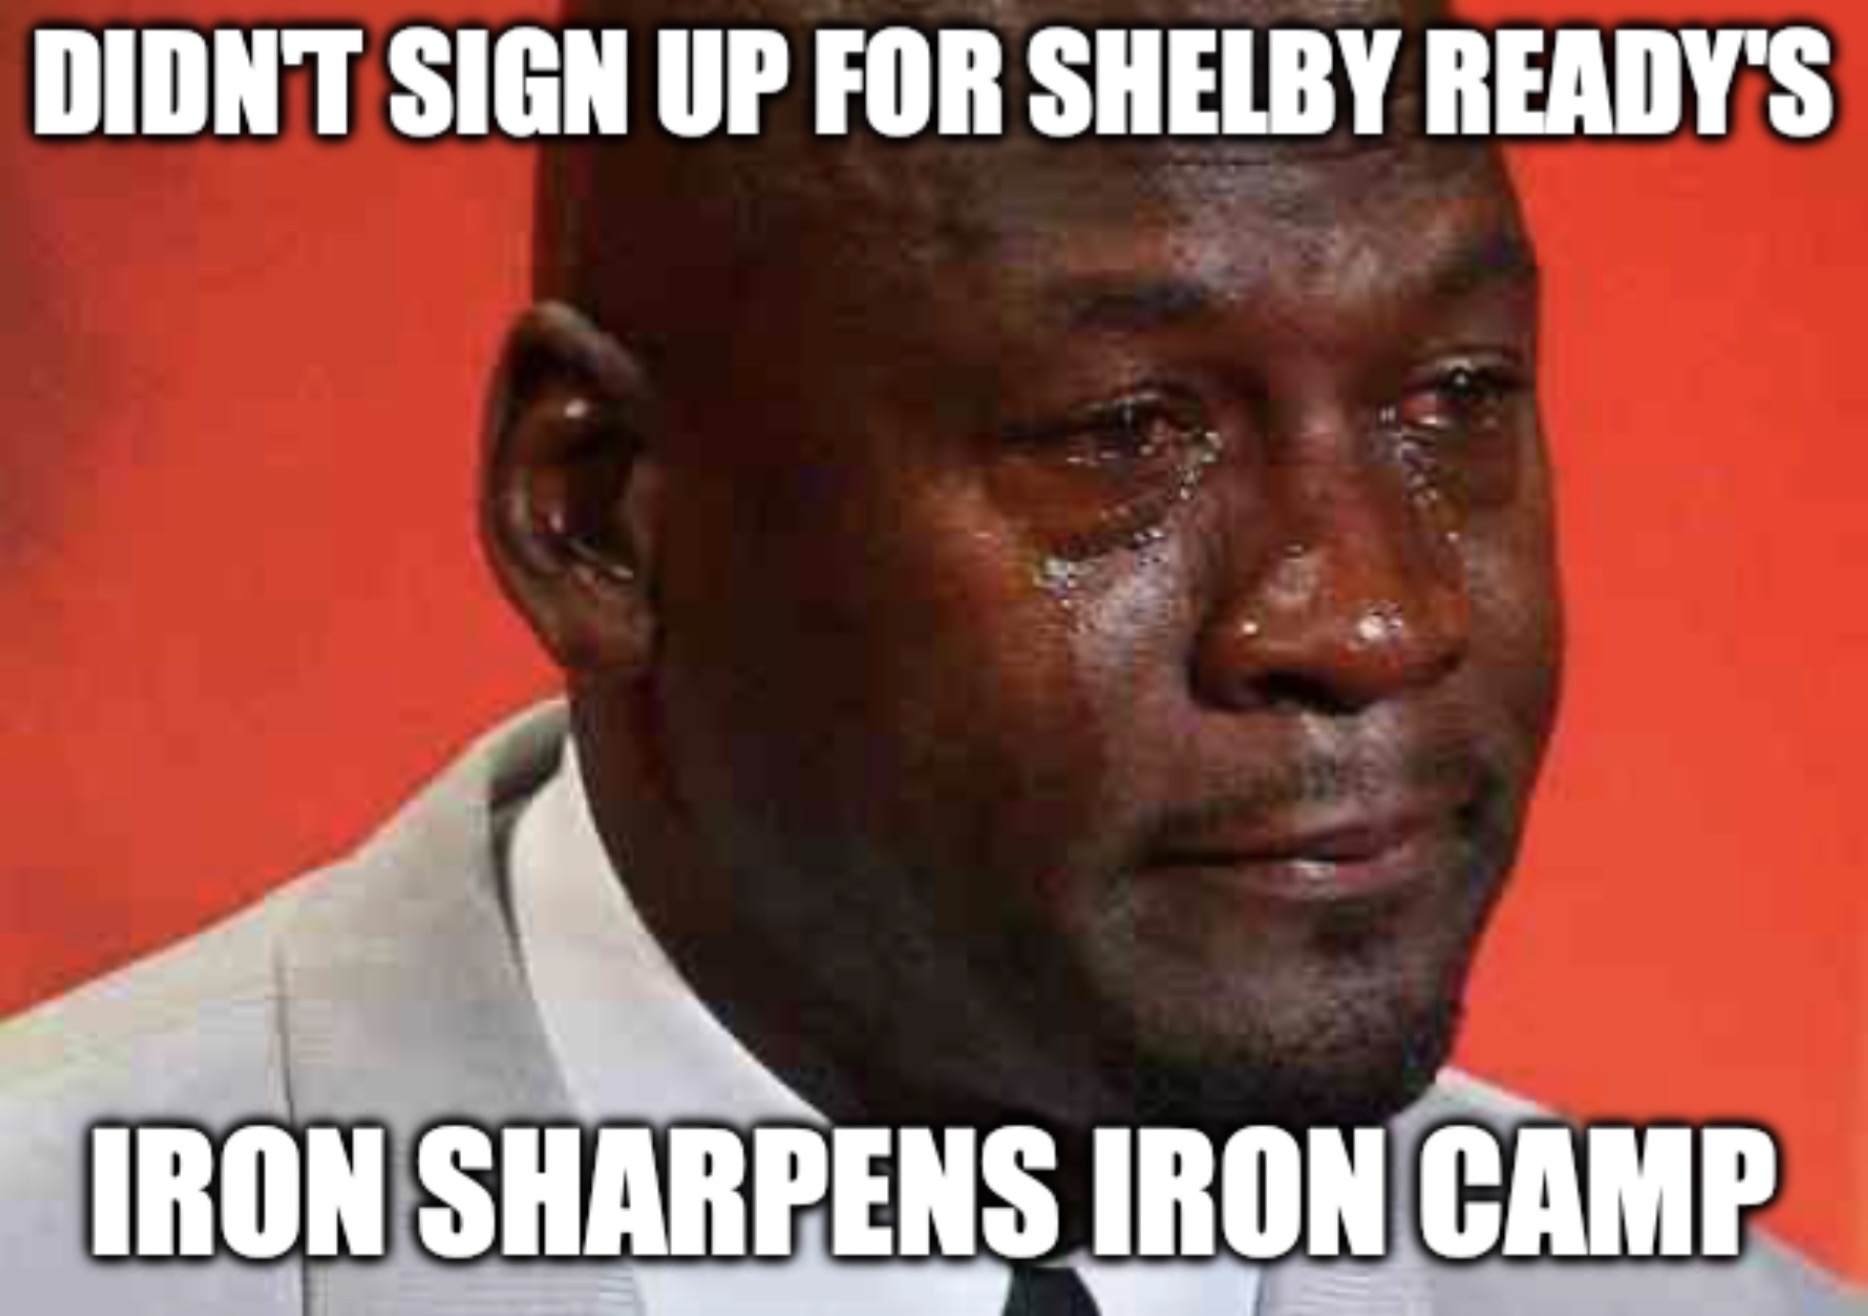 Sign up for iron sharpens iron camp